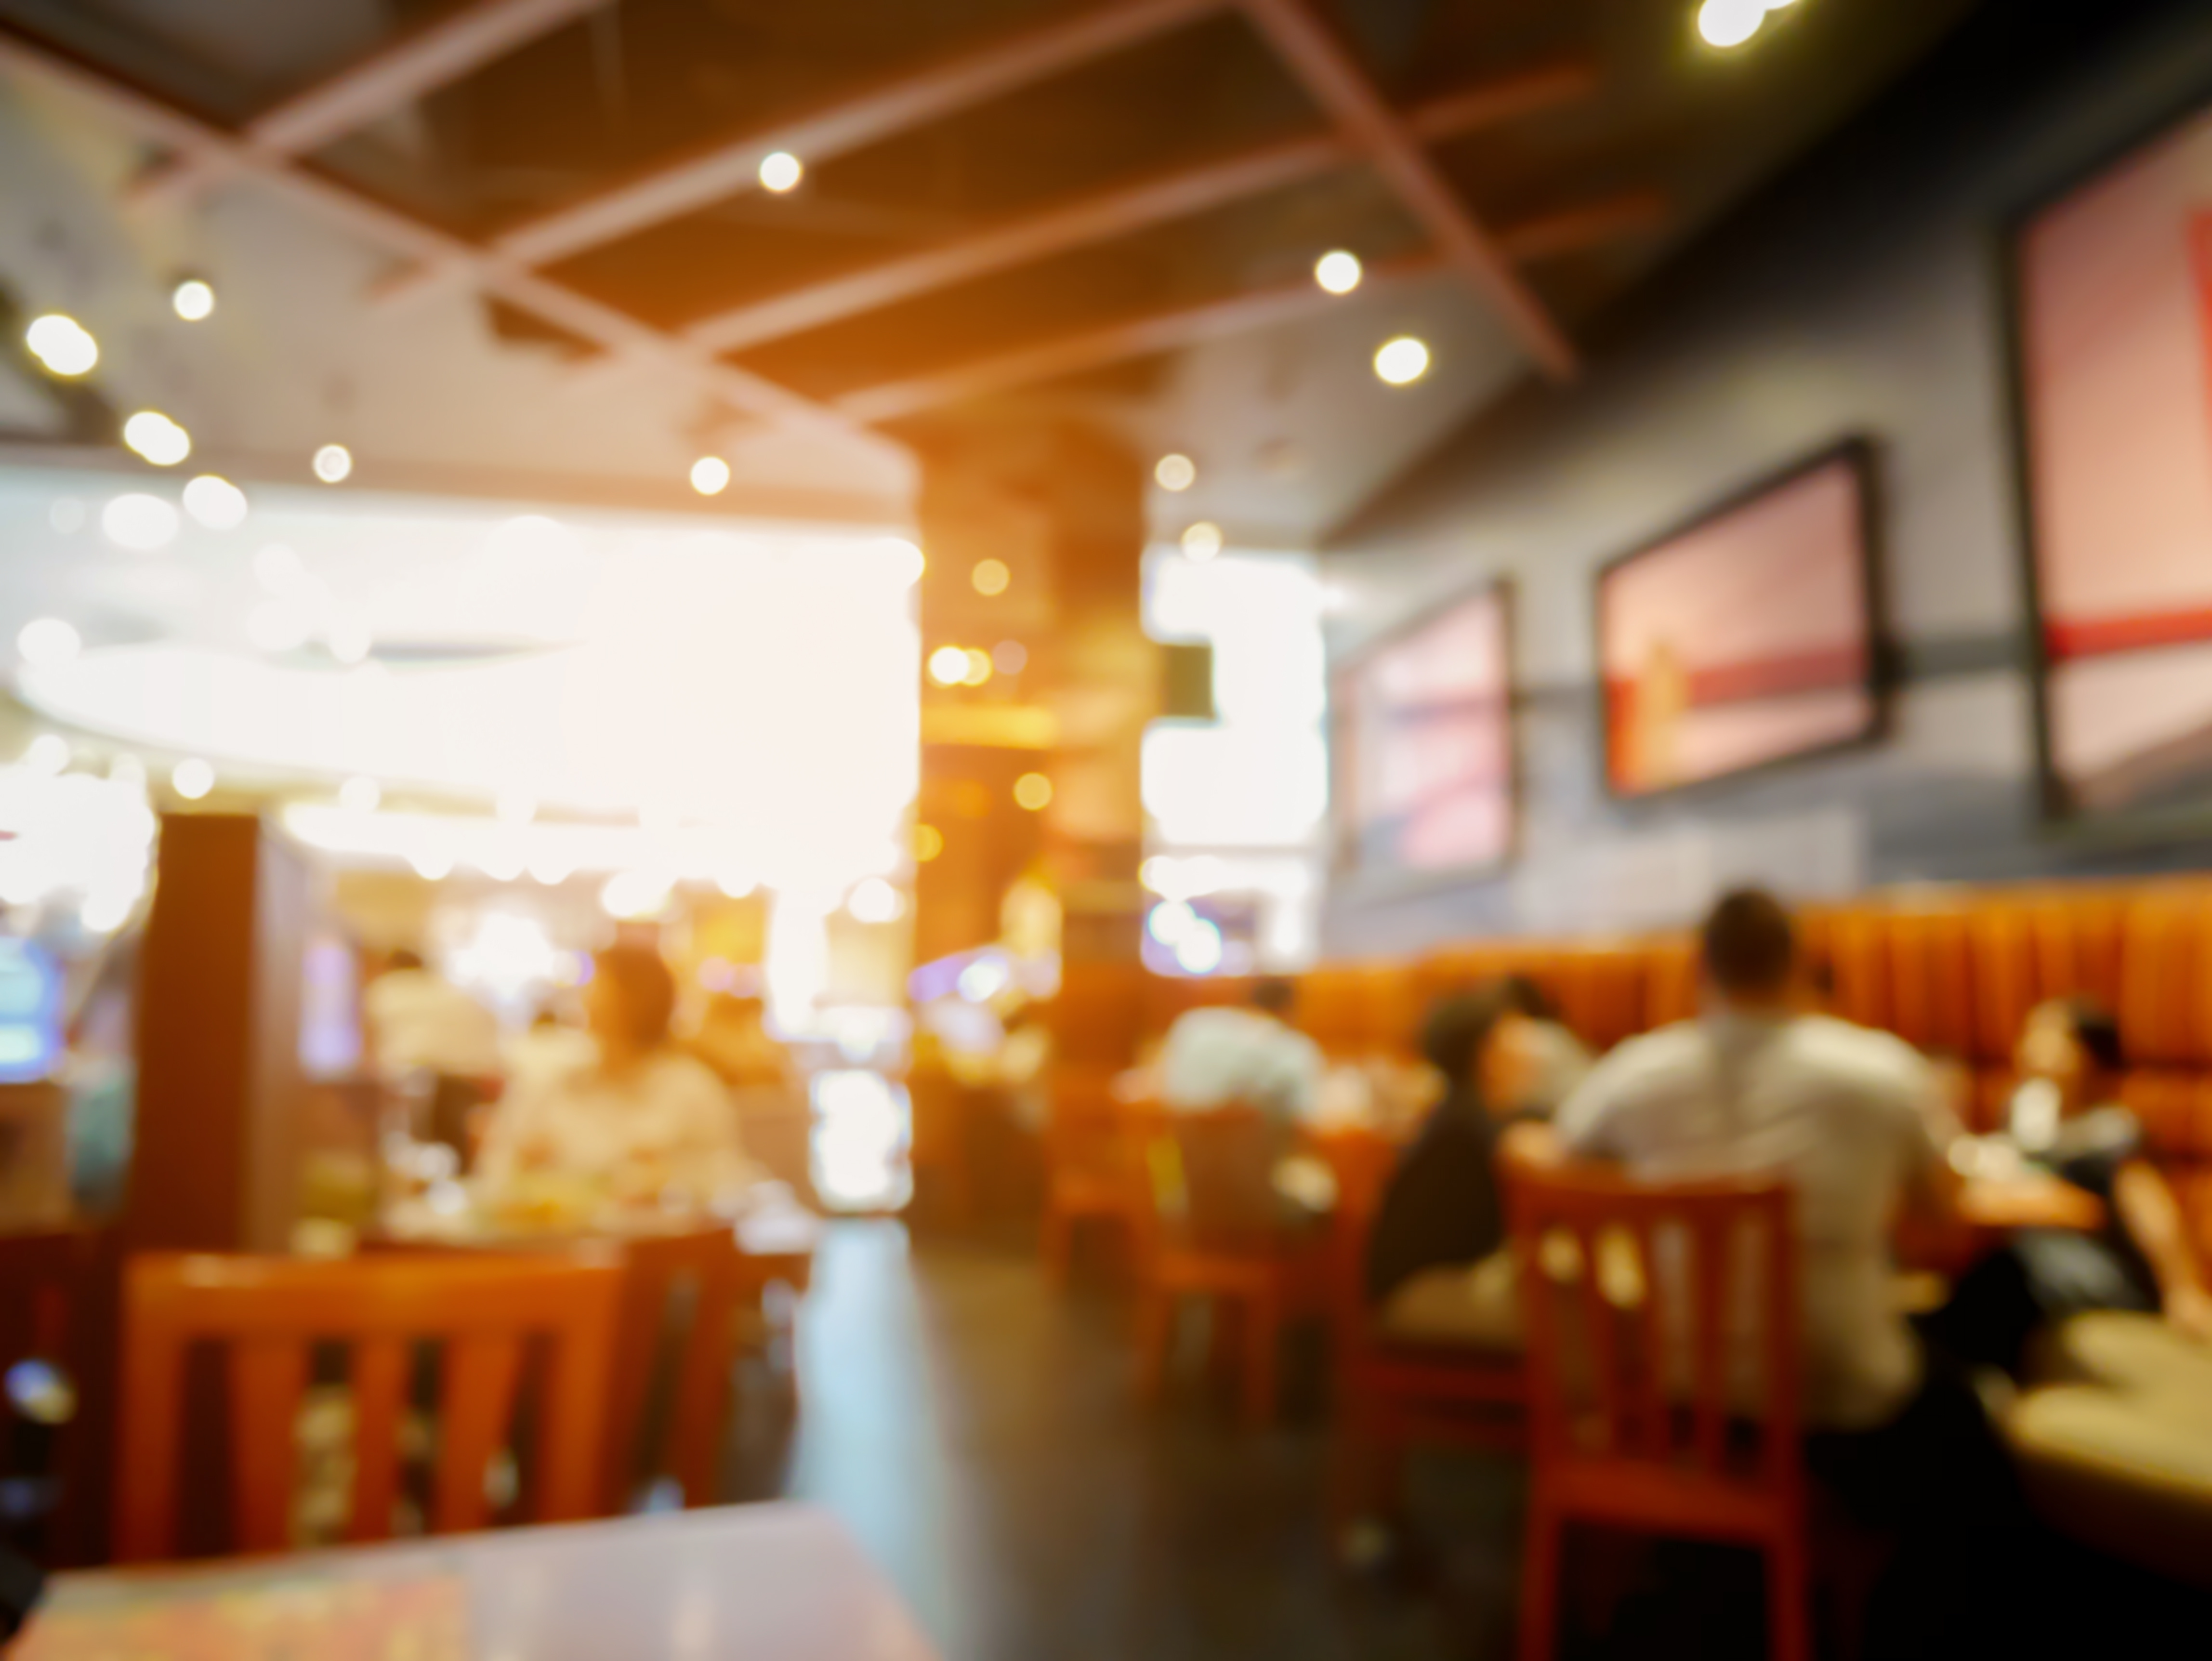 10 Issues In Your Restaurant You May Be Overlooking